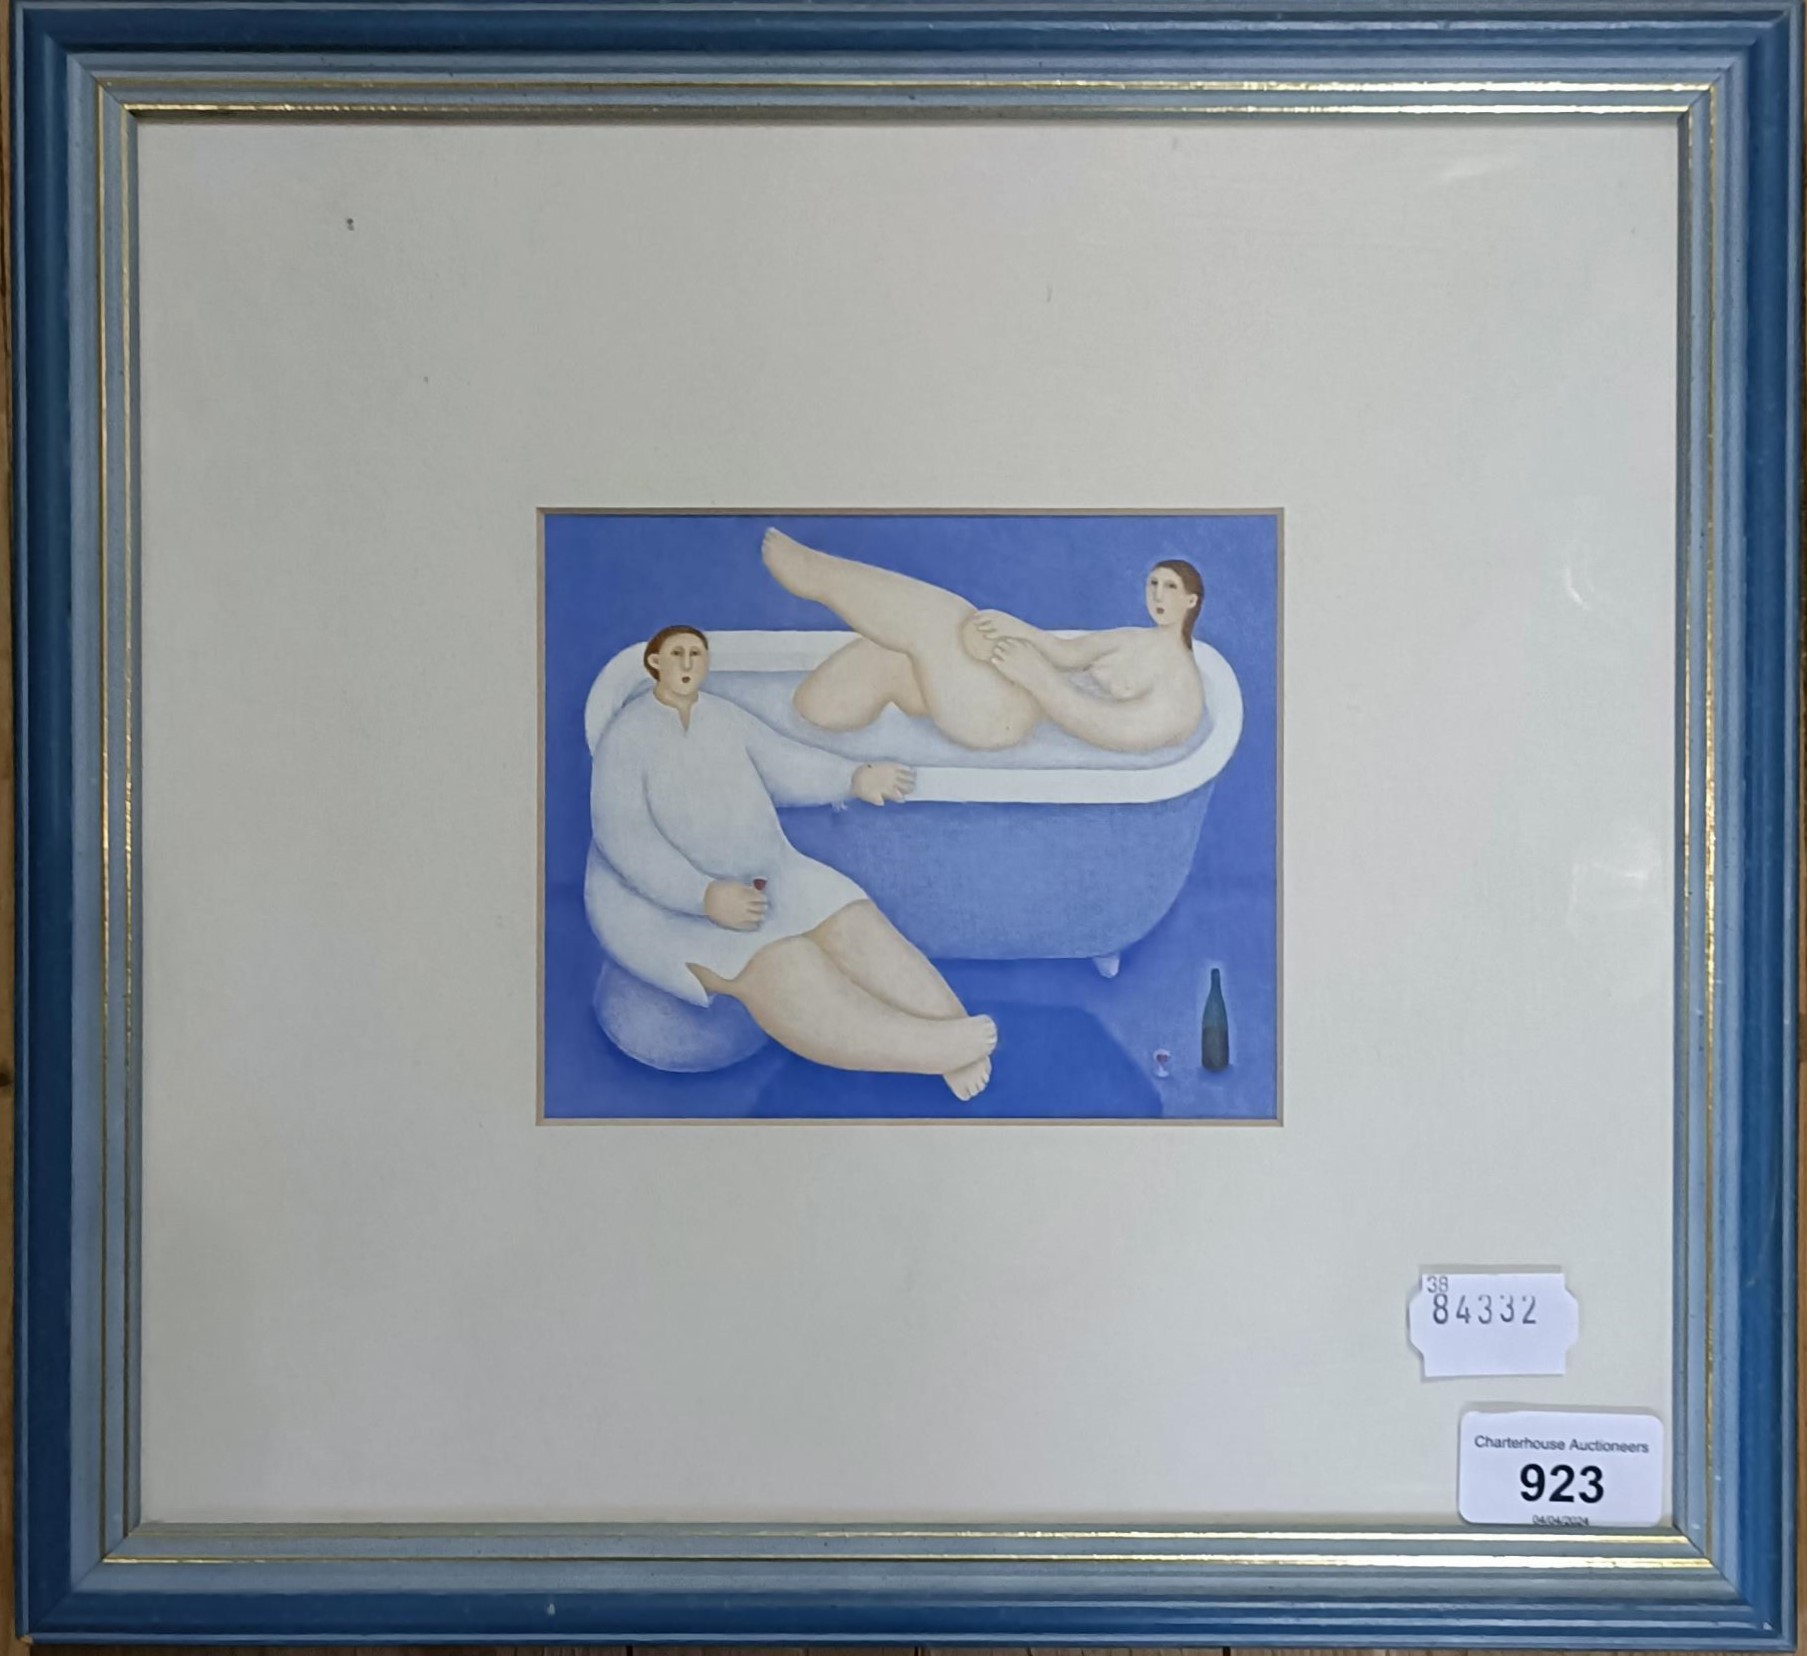 20th century, English school, two figures in the bath, watercolour, 10 x 14 cm - Image 2 of 3